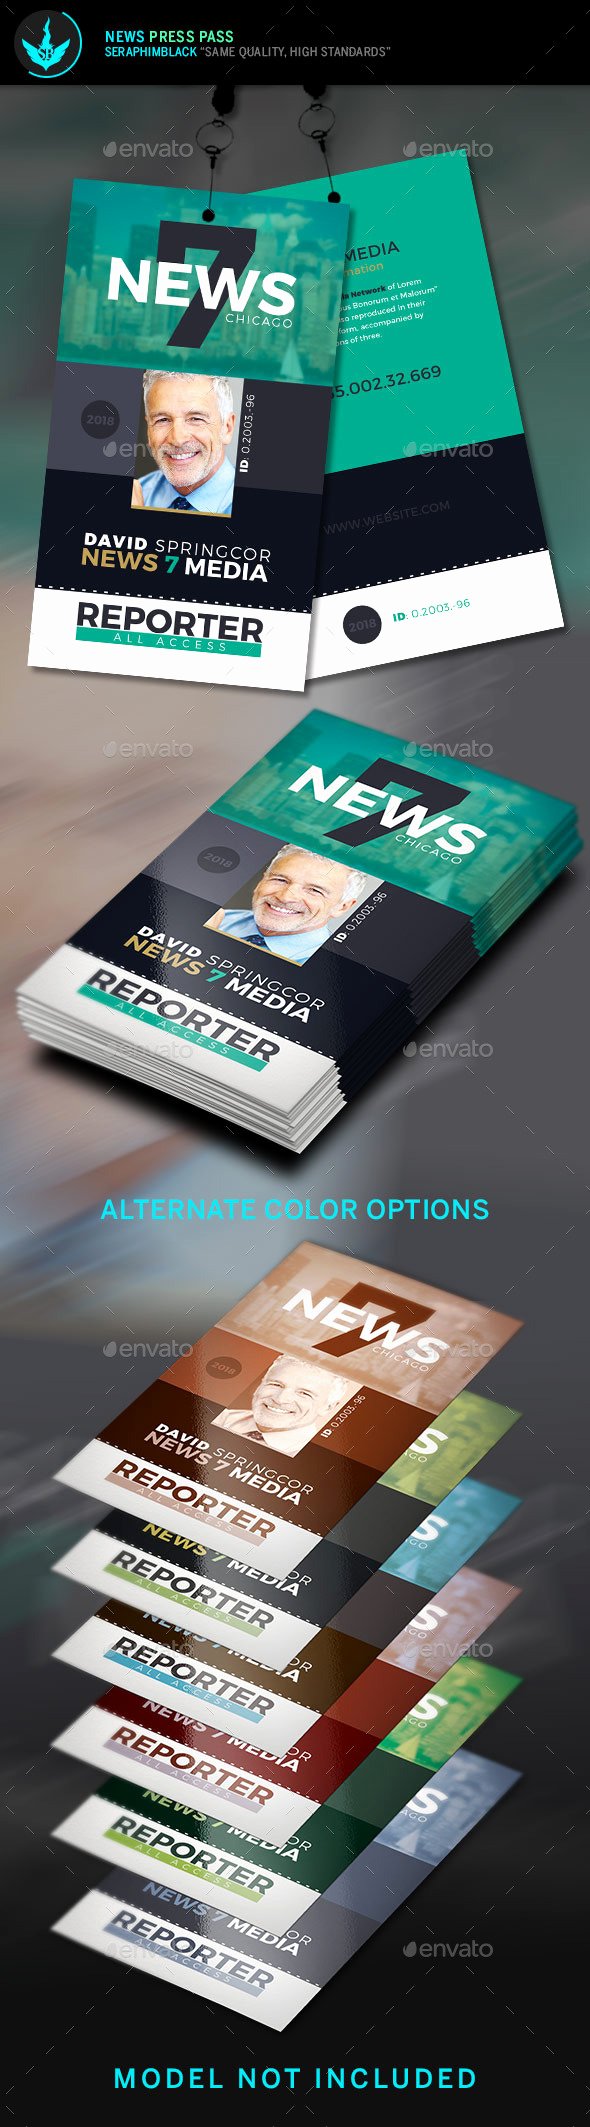 Press Pass Template Free Unique Press Pass Template by Seraphimblack